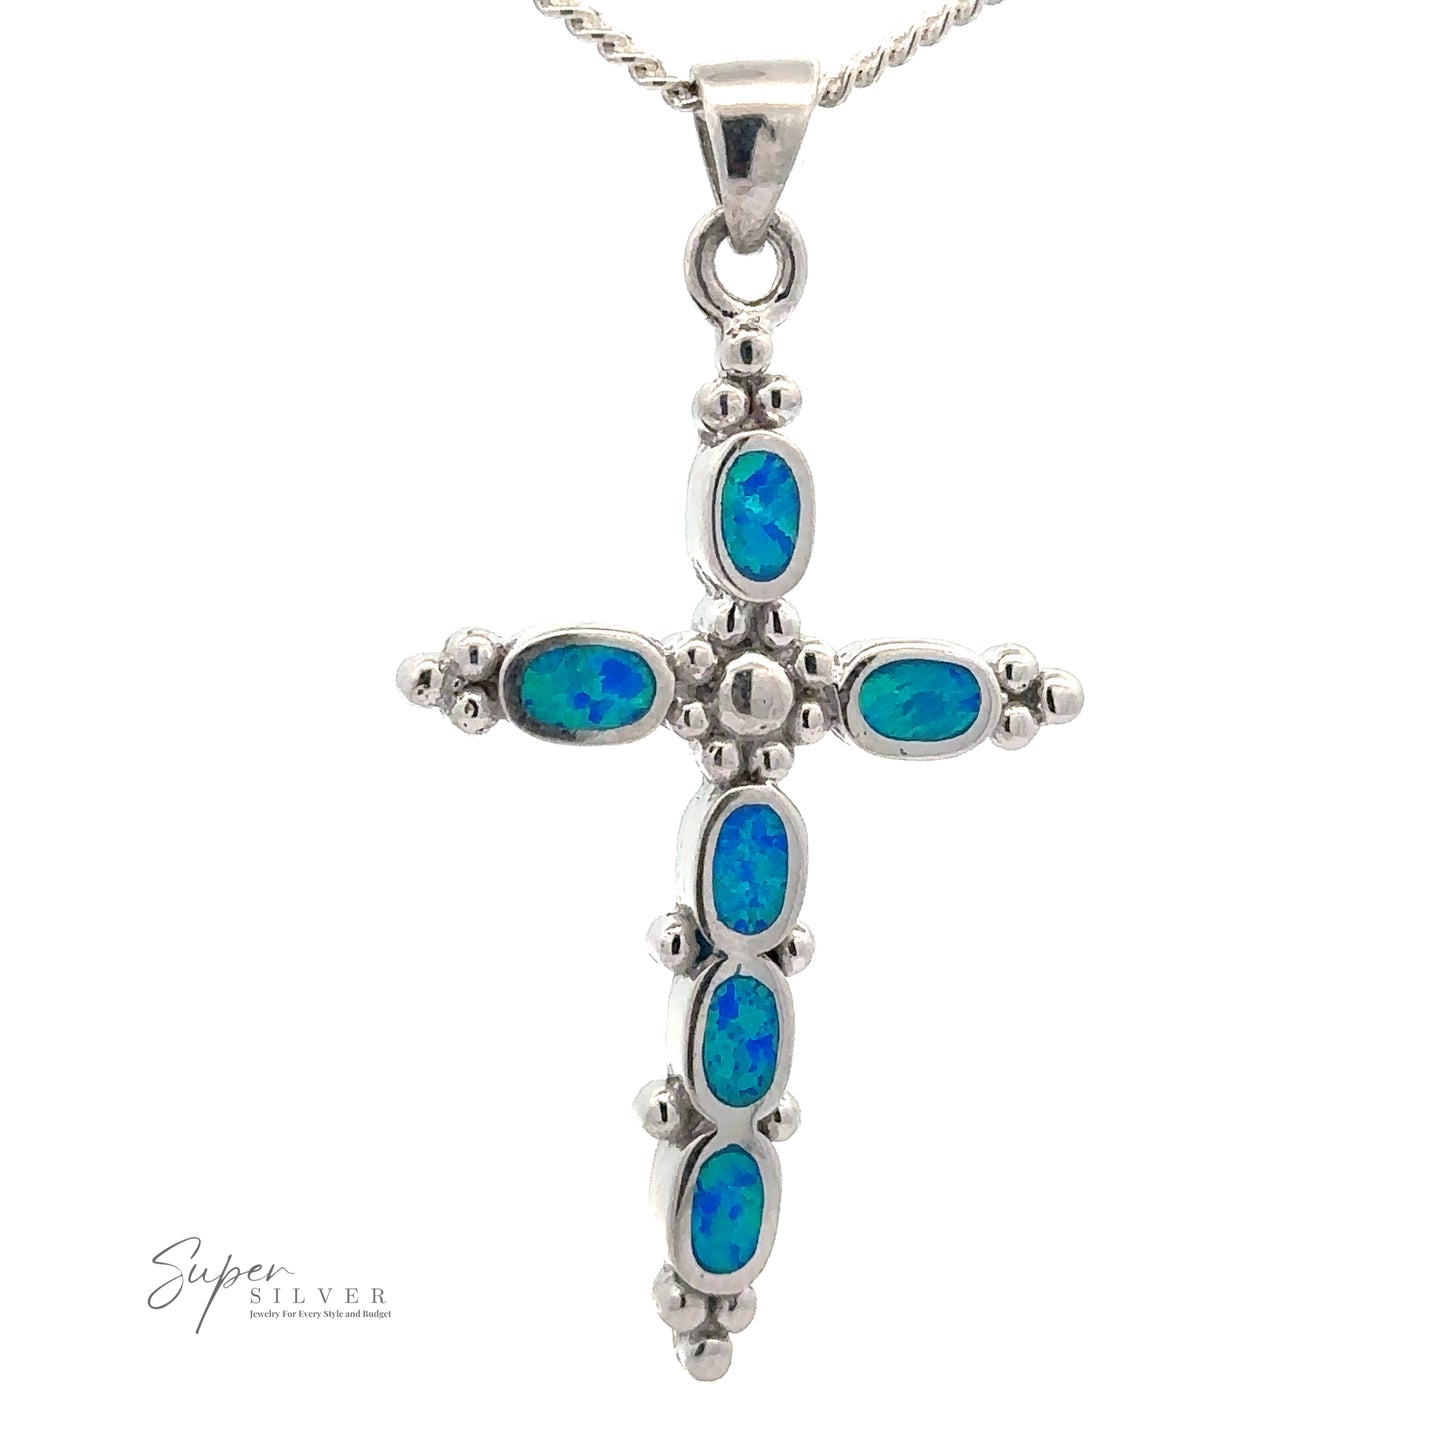 
                  
                    A Blue Opal Cross Pendant With Oval Stones featuring blue-green oval blue opal gemstones, hanging on a silver chain. The image includes a "Super Silver" logo in the bottom left corner.
                  
                